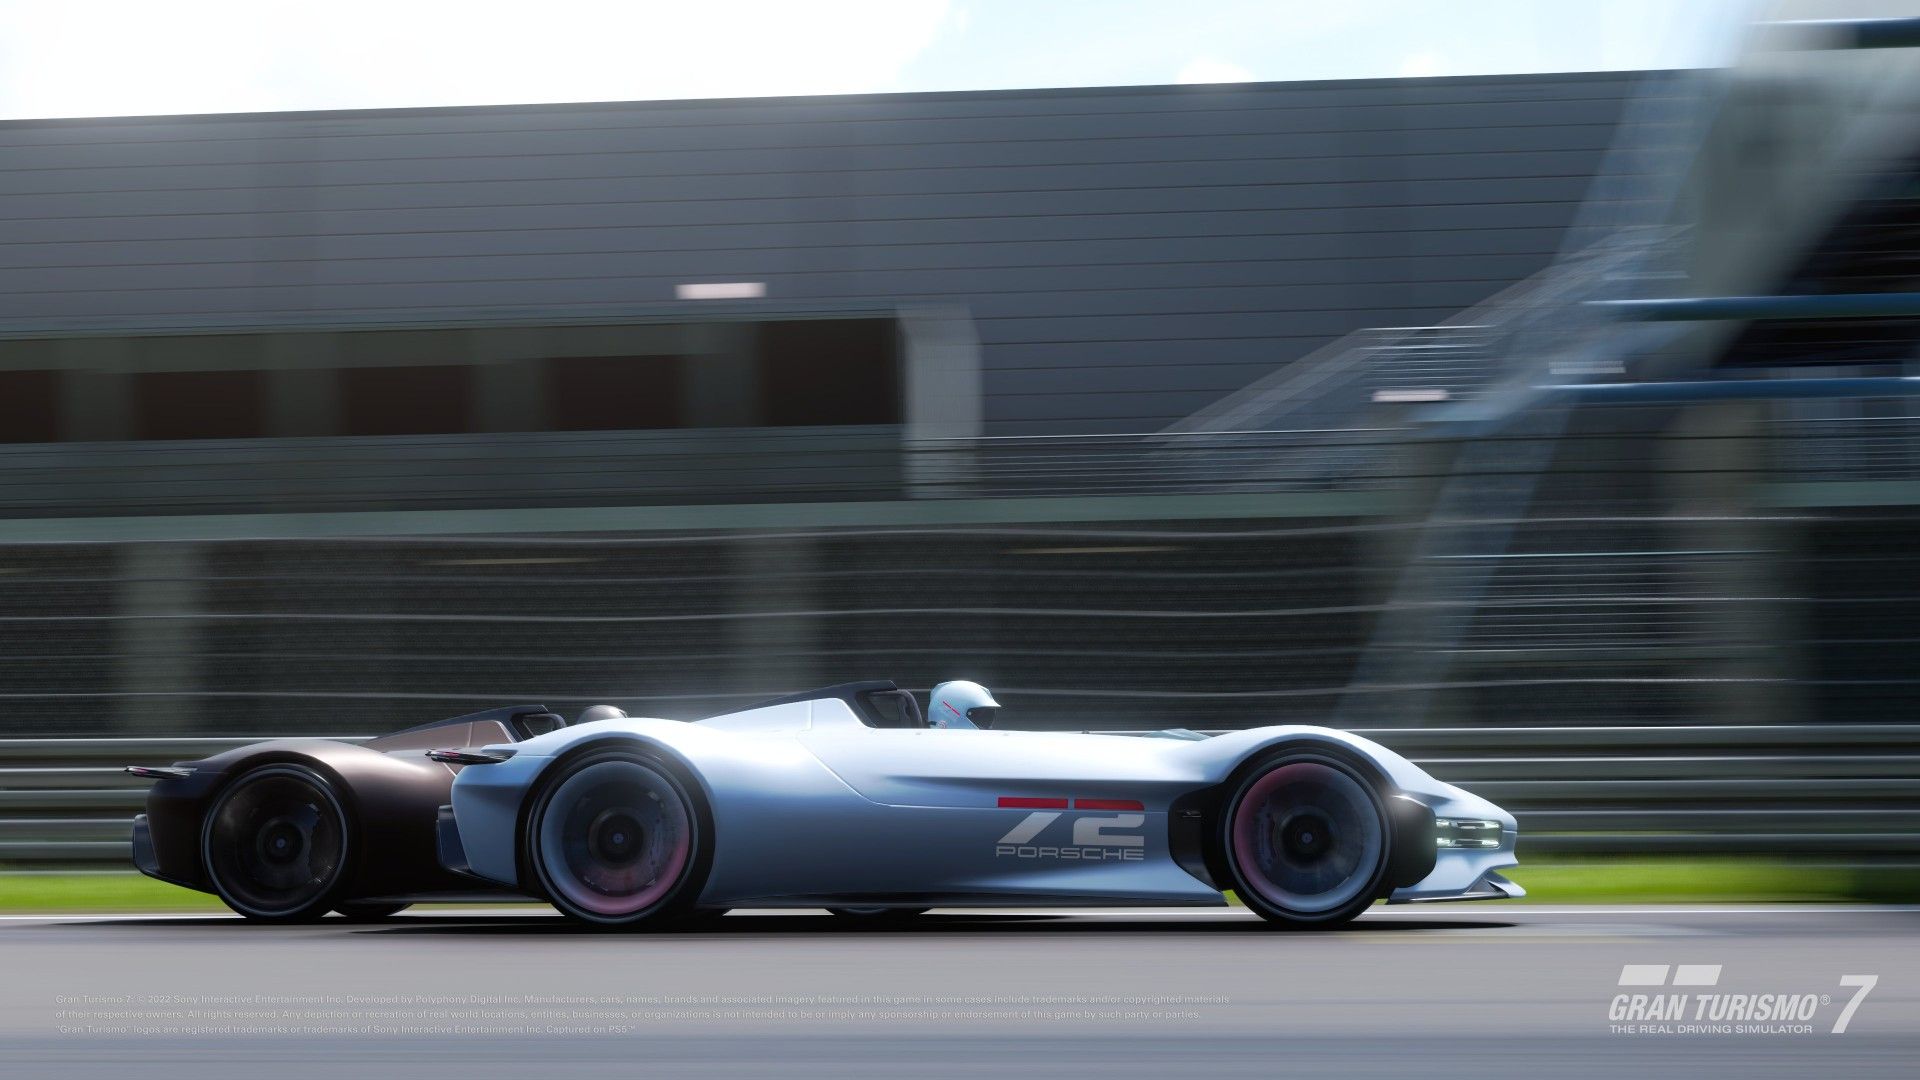 Porsche Vision GT Spyder coming to Gran Turismo 7 on Sept. 29